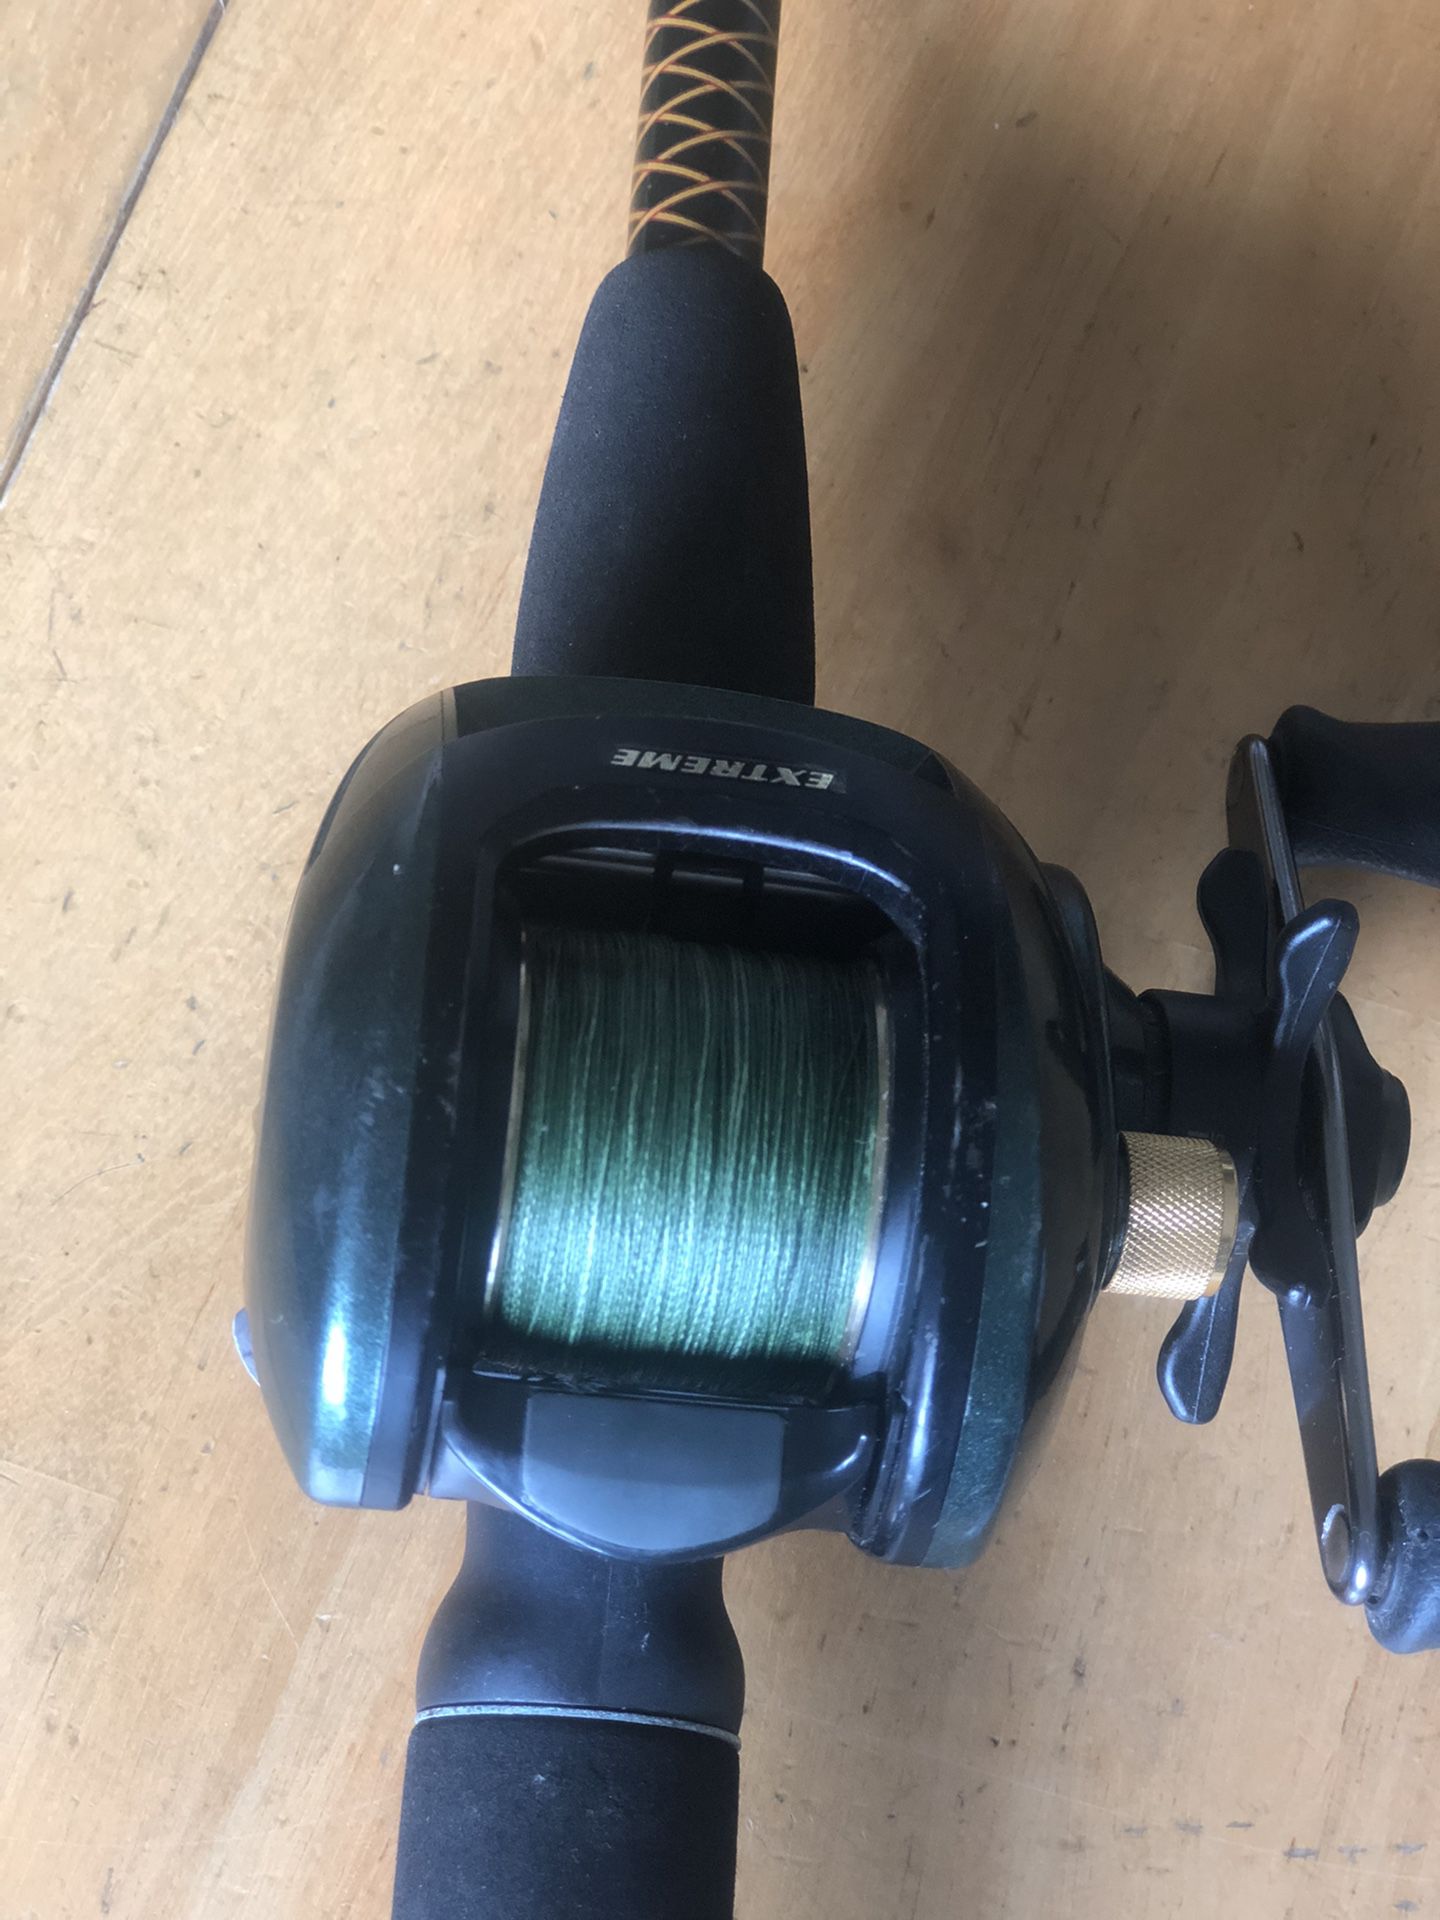 ETx20HD Extreme with 6” Ugly Stick rod